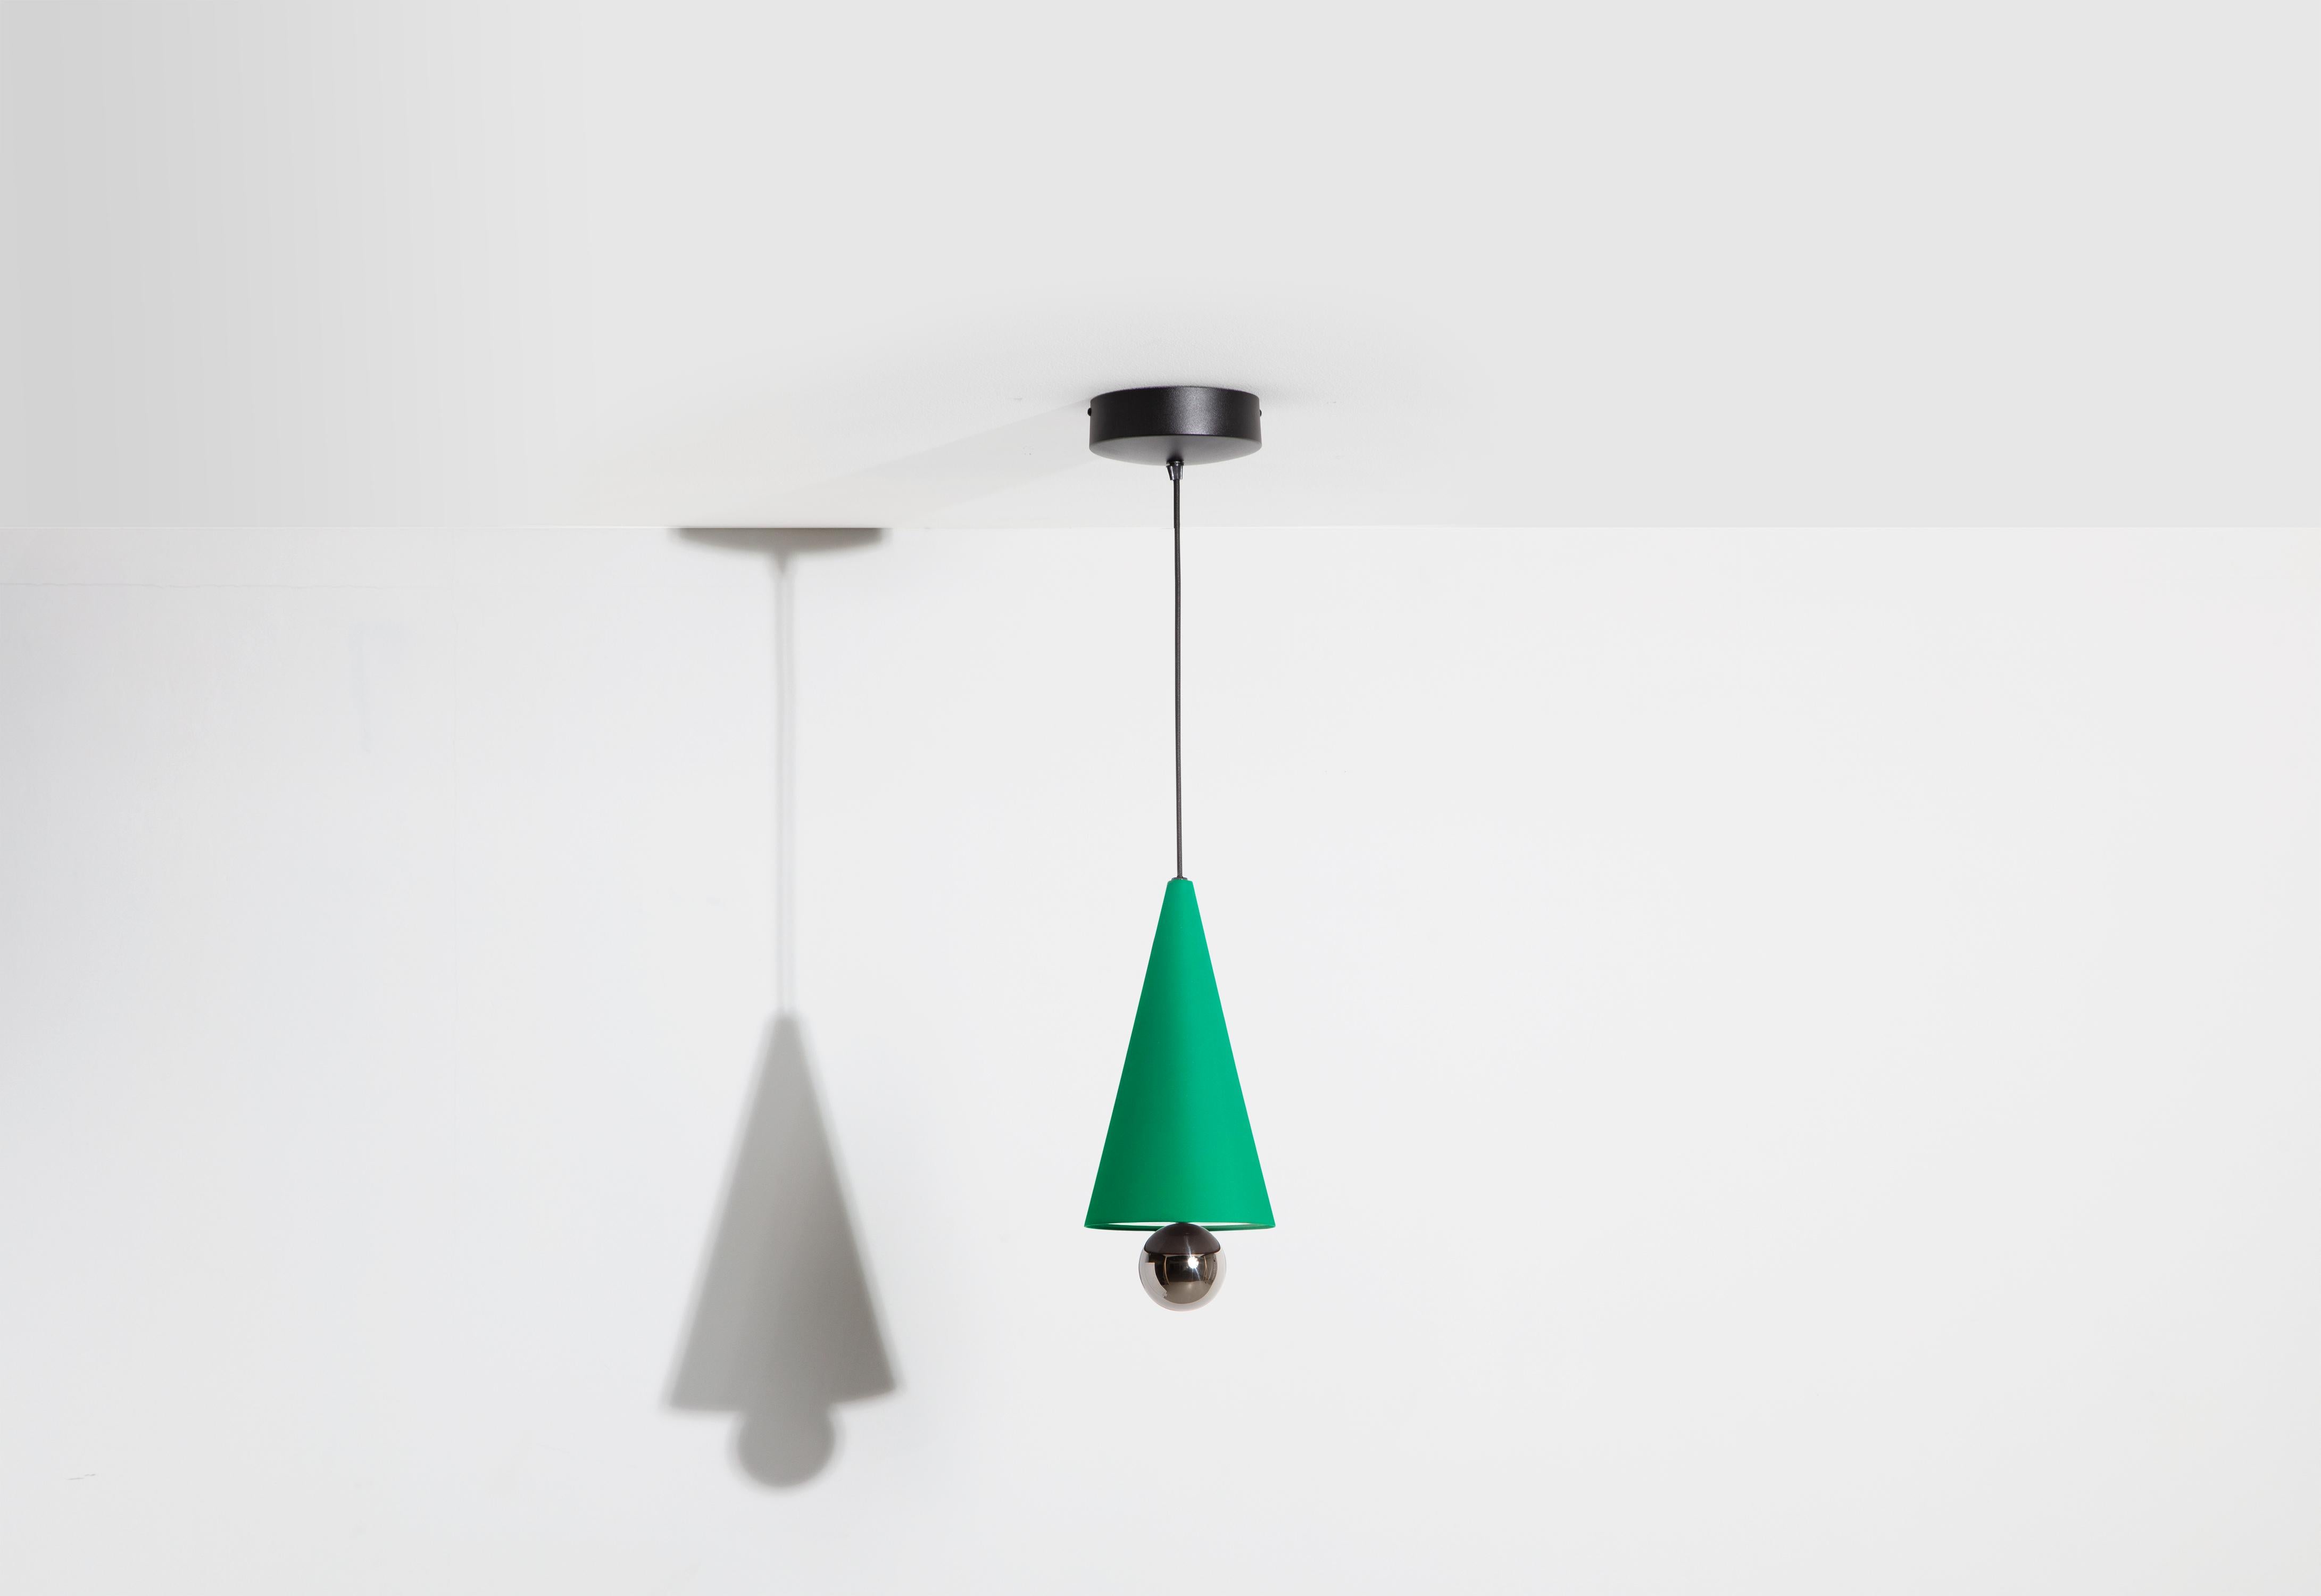 Petite Friture Small Cherry LED Pendant Light in Mint-green & Titanium Aluminium by Daniel and Emma, 2020

In 2015, the Australian duo designers Daniel and Emma signed Cherry a simple and minimalist pendant lamp design ; an aluminum cone with a